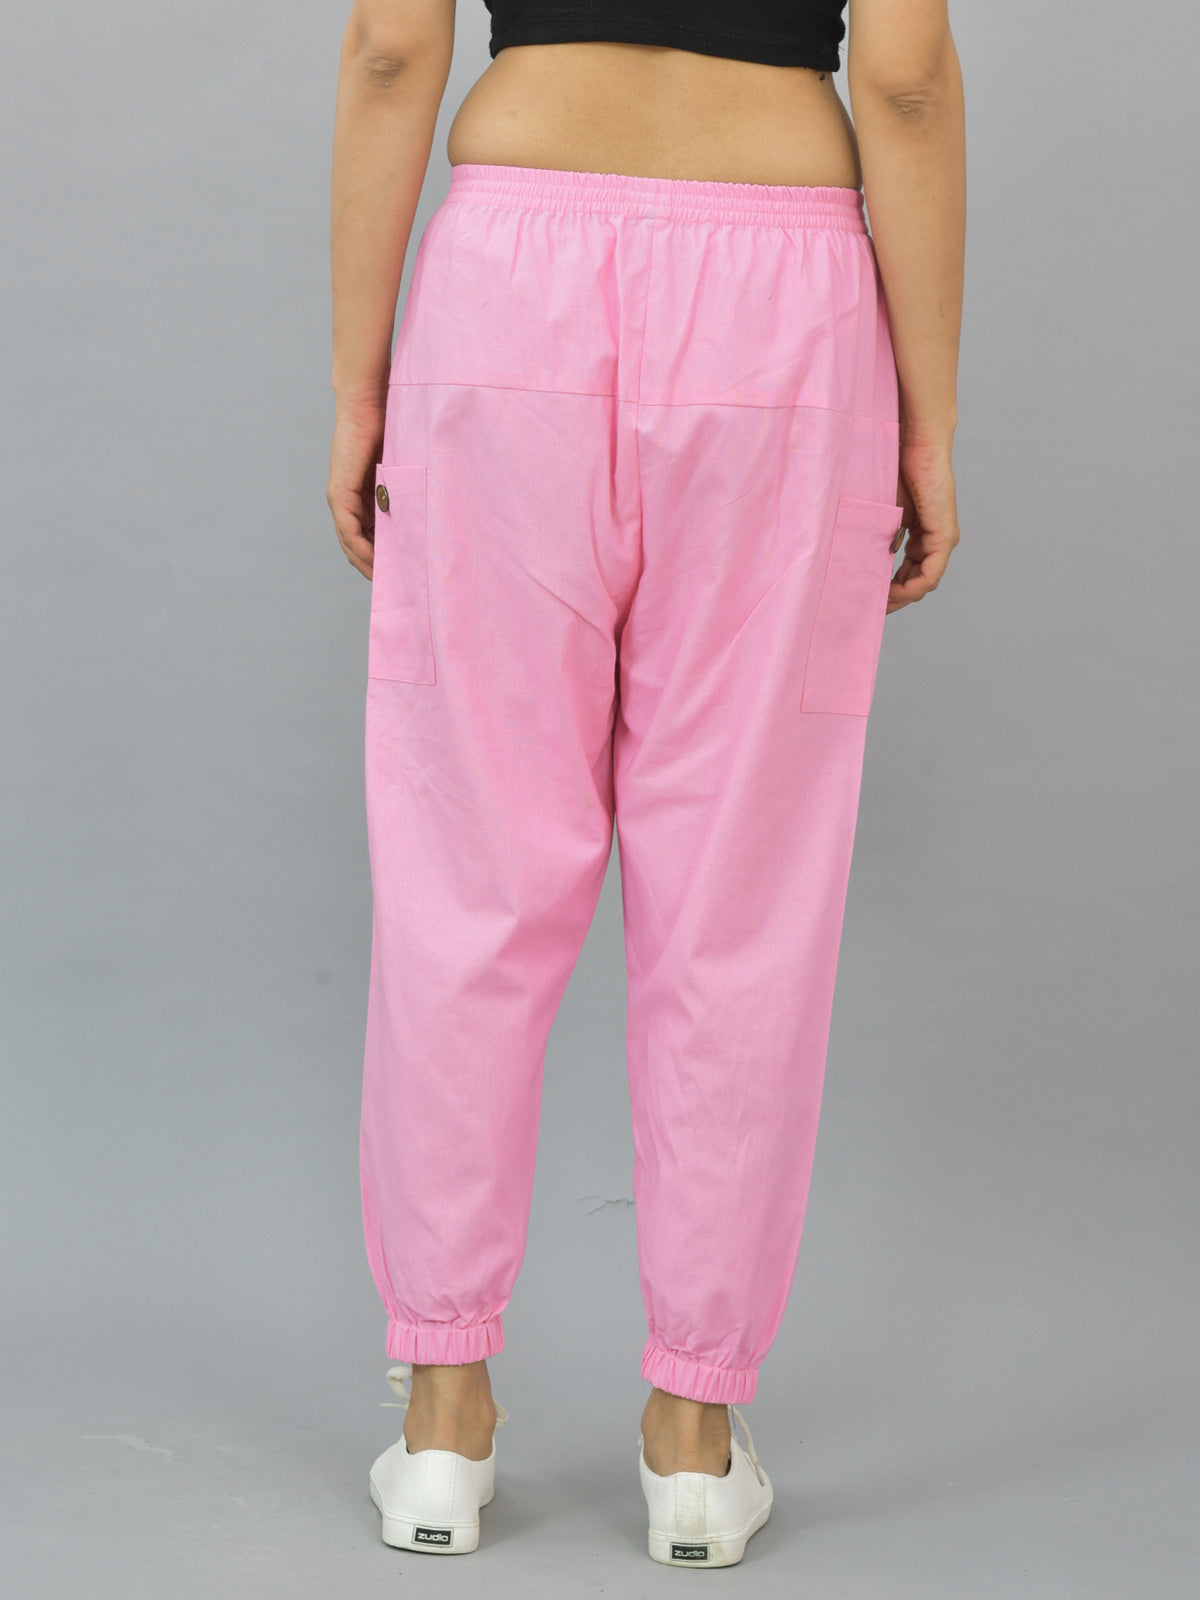 Combo Pack Of Womens Maroon And Pink Four Pocket Cotton Cargo Pants